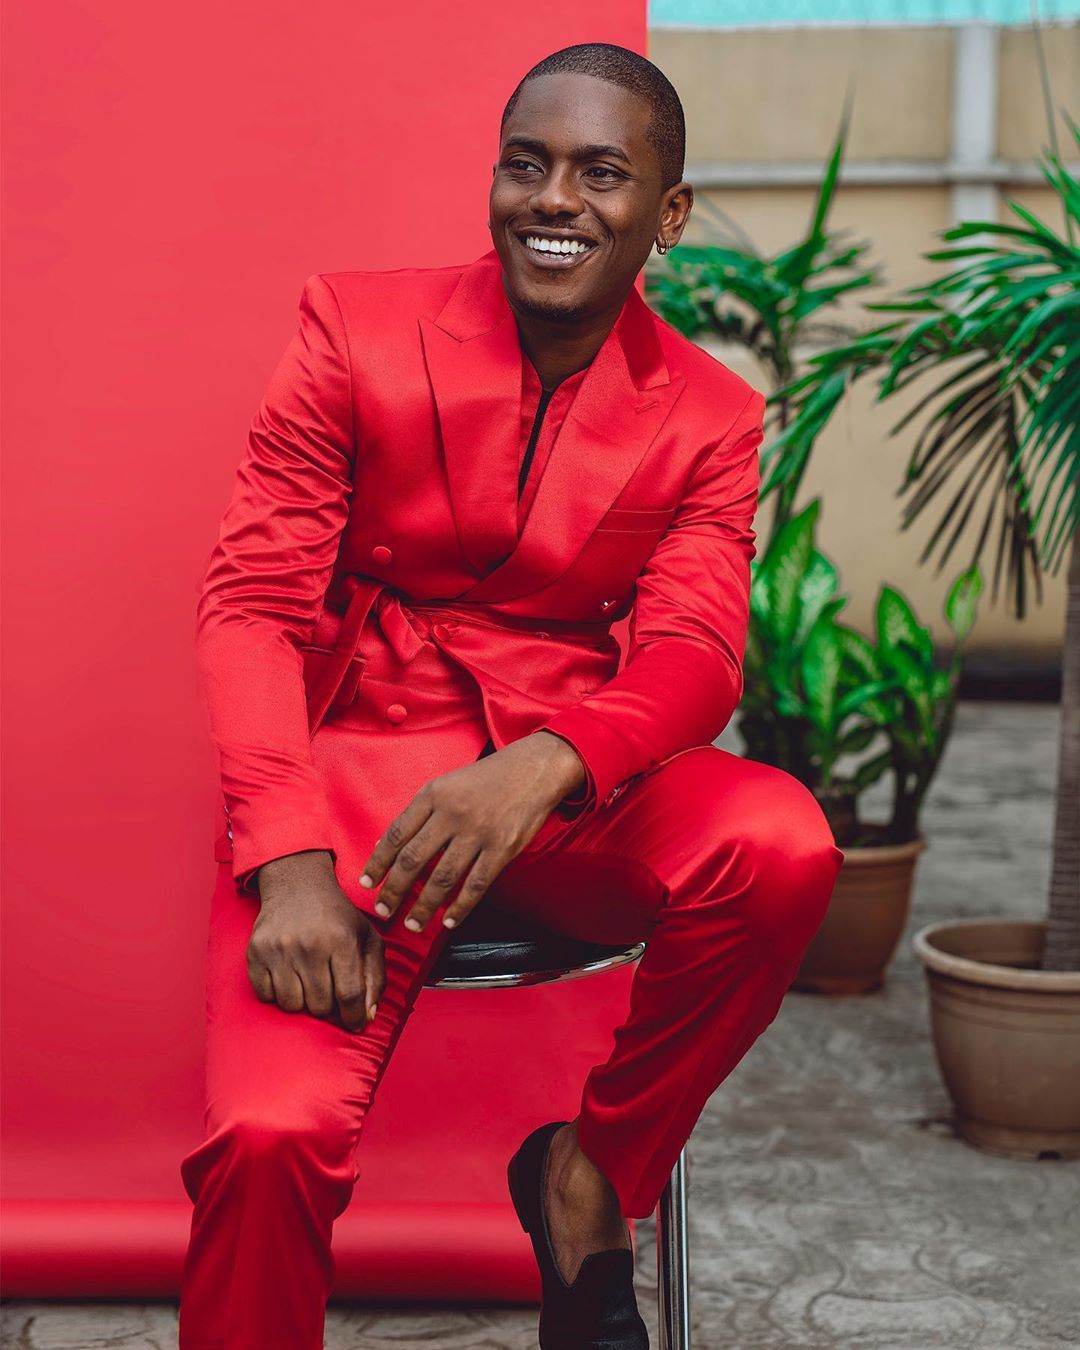 Men-style-fashion-red-suit-style-rave